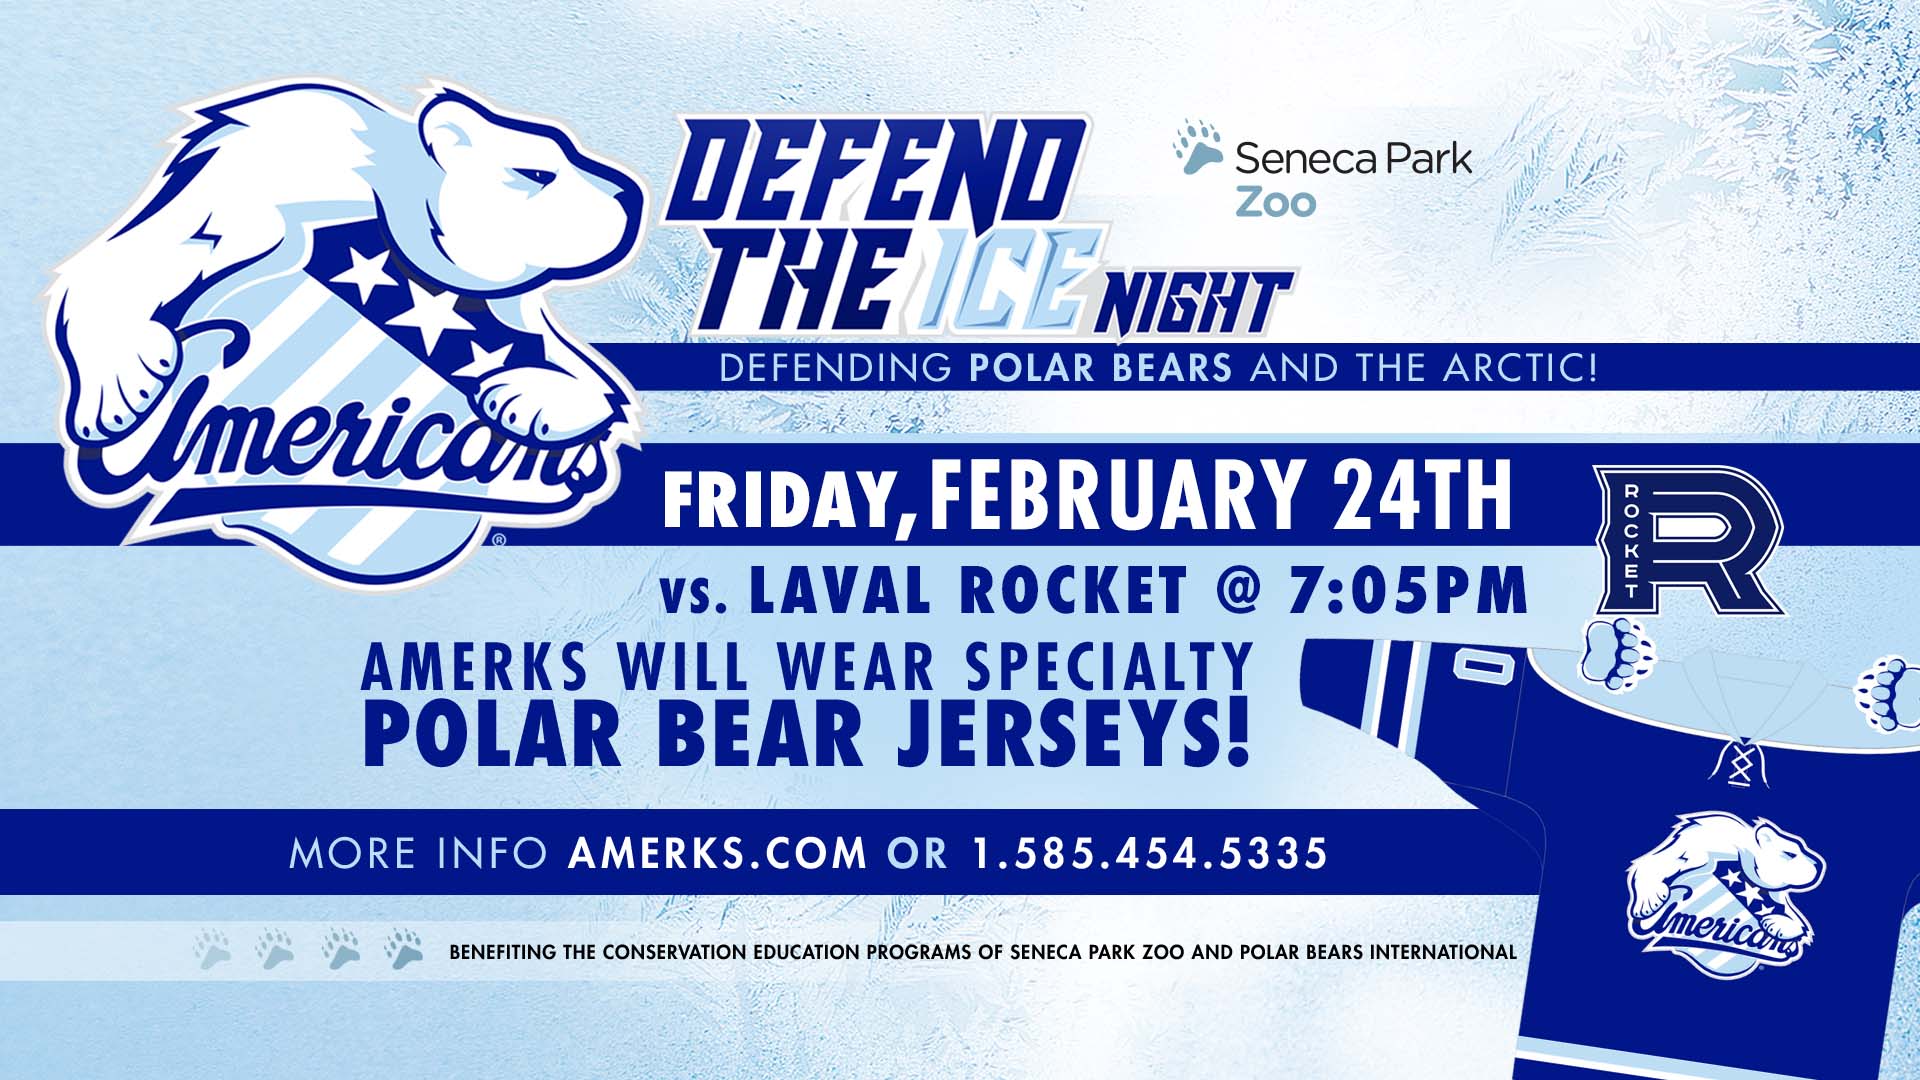 AMERKS RENEW PARTNERSHIP WITH SENECA PARK ZOO FOR “DEFEND THE ICE MONTH”